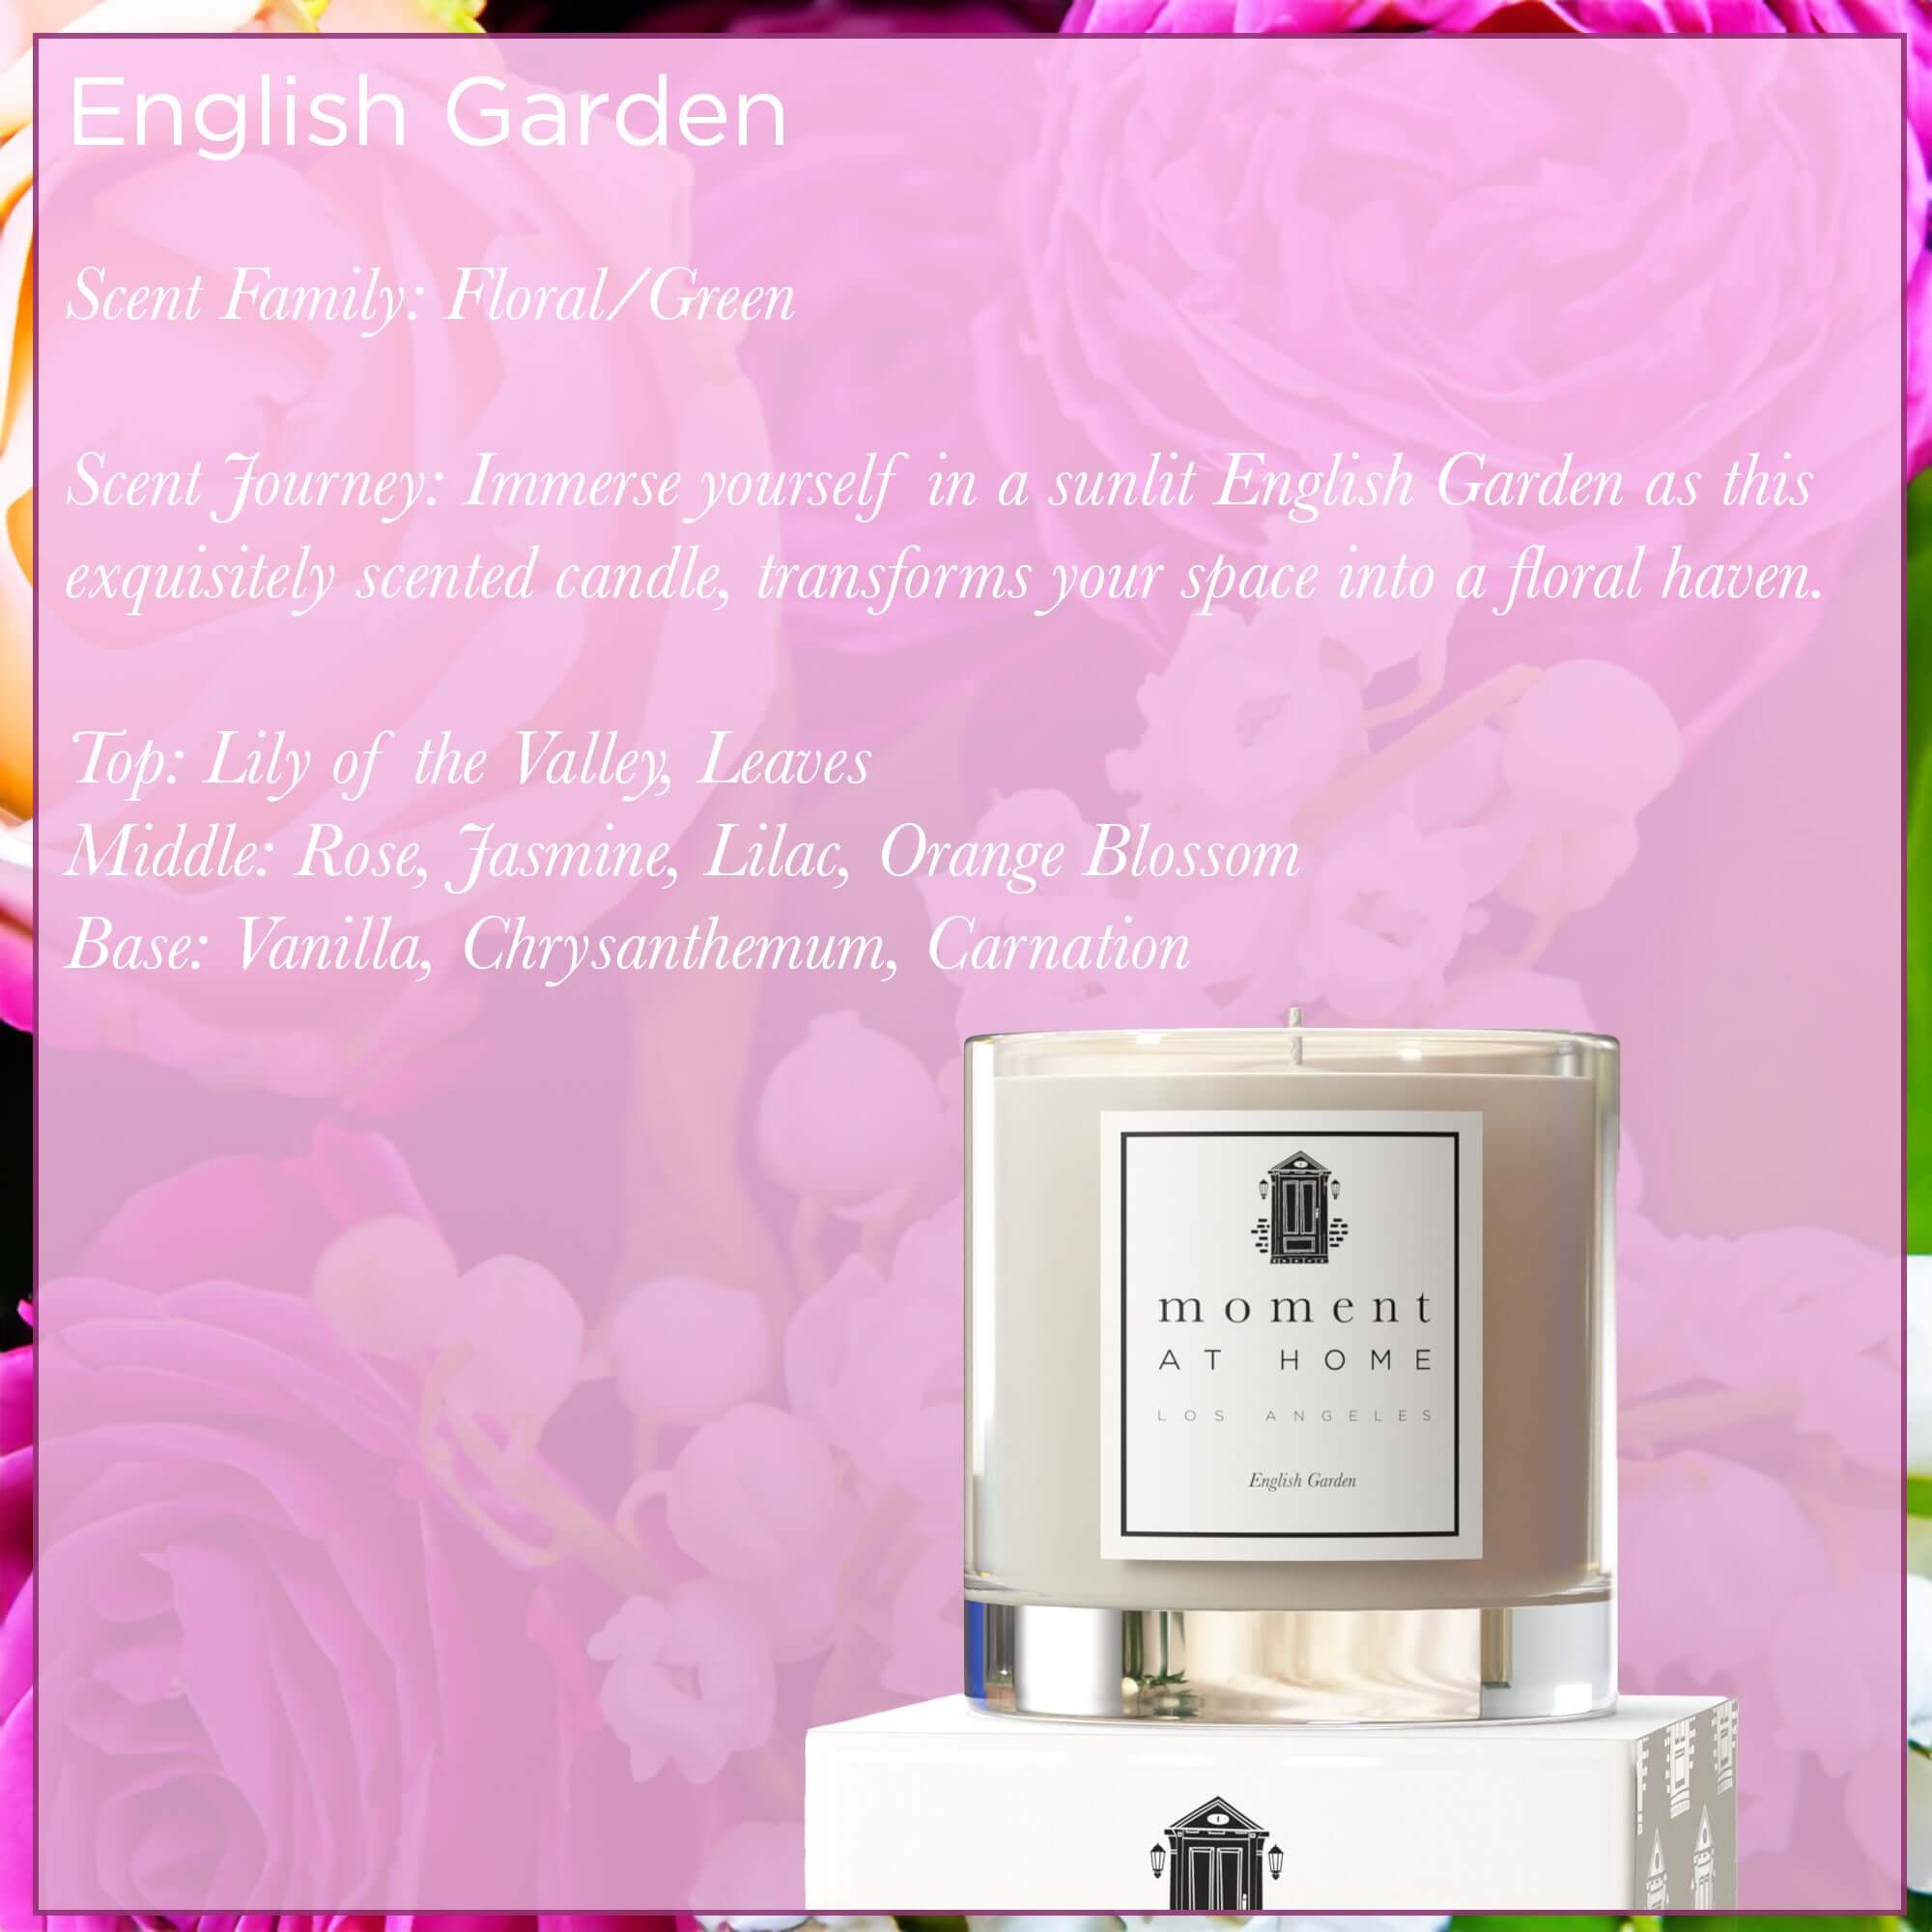 The English Garden Scented Candle takes you on a floral scent journey with notes of lilies, rose & jasmine.